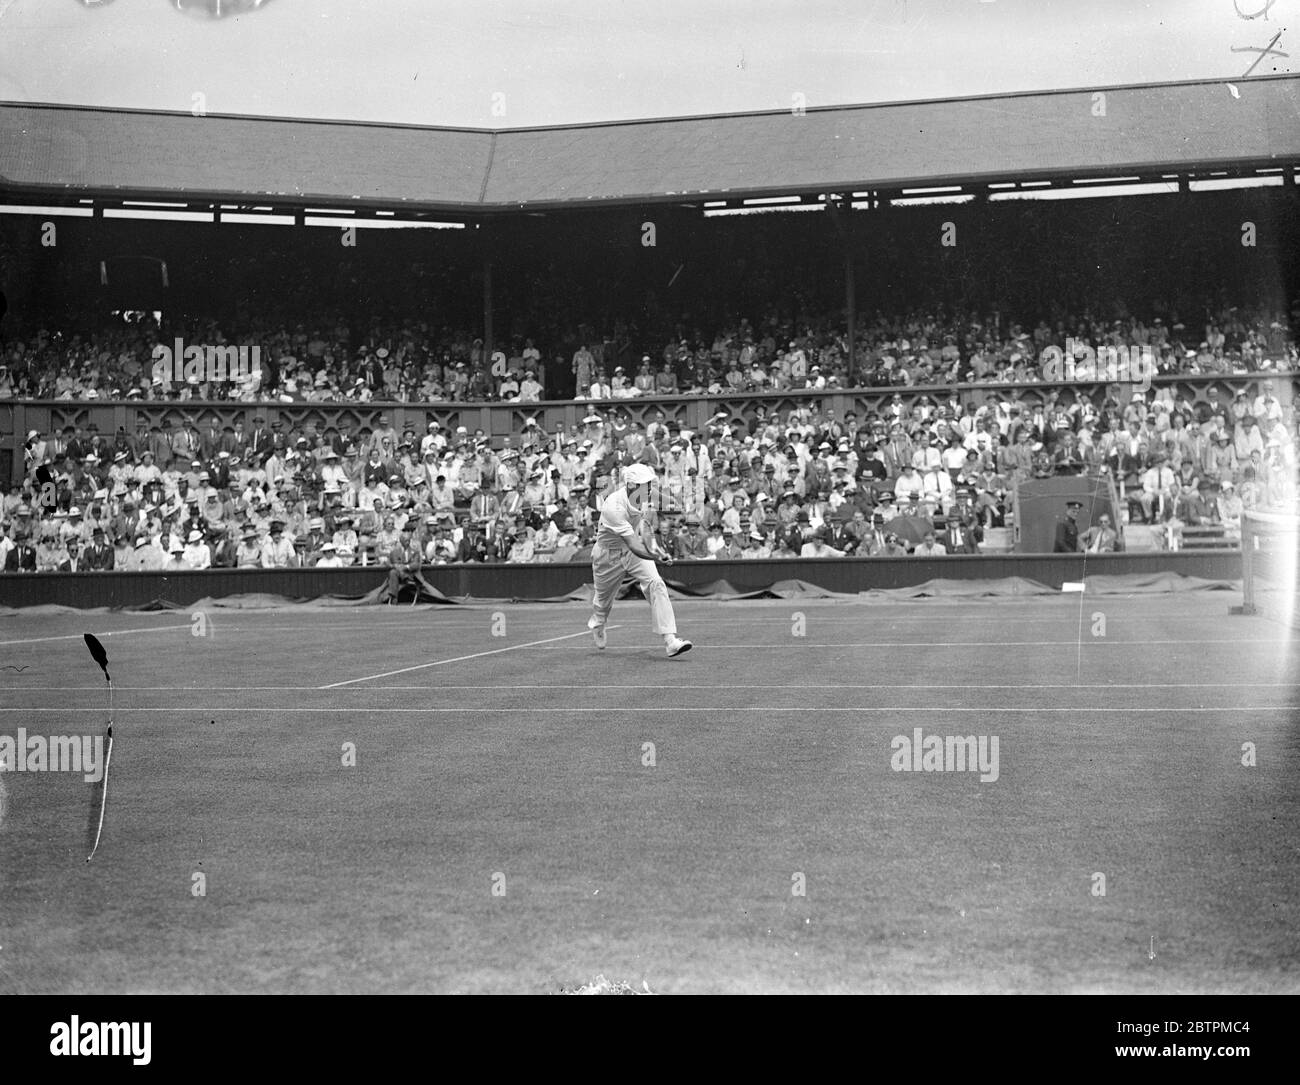 American Duel At Wimbledon . Allison Defeats Jones In Singles . After a stern duel Wilmer Allison ( USA ) defeated his fellow - American David N . Jones 14 - 12 , 6 - 3 , 6 - 4 in the men ' s singles of the WimbledonTennis Championships . Photo Shows : Wilmer Alisson in play against Jones on the Centre Court . 24 Jun 1936 Stock Photo